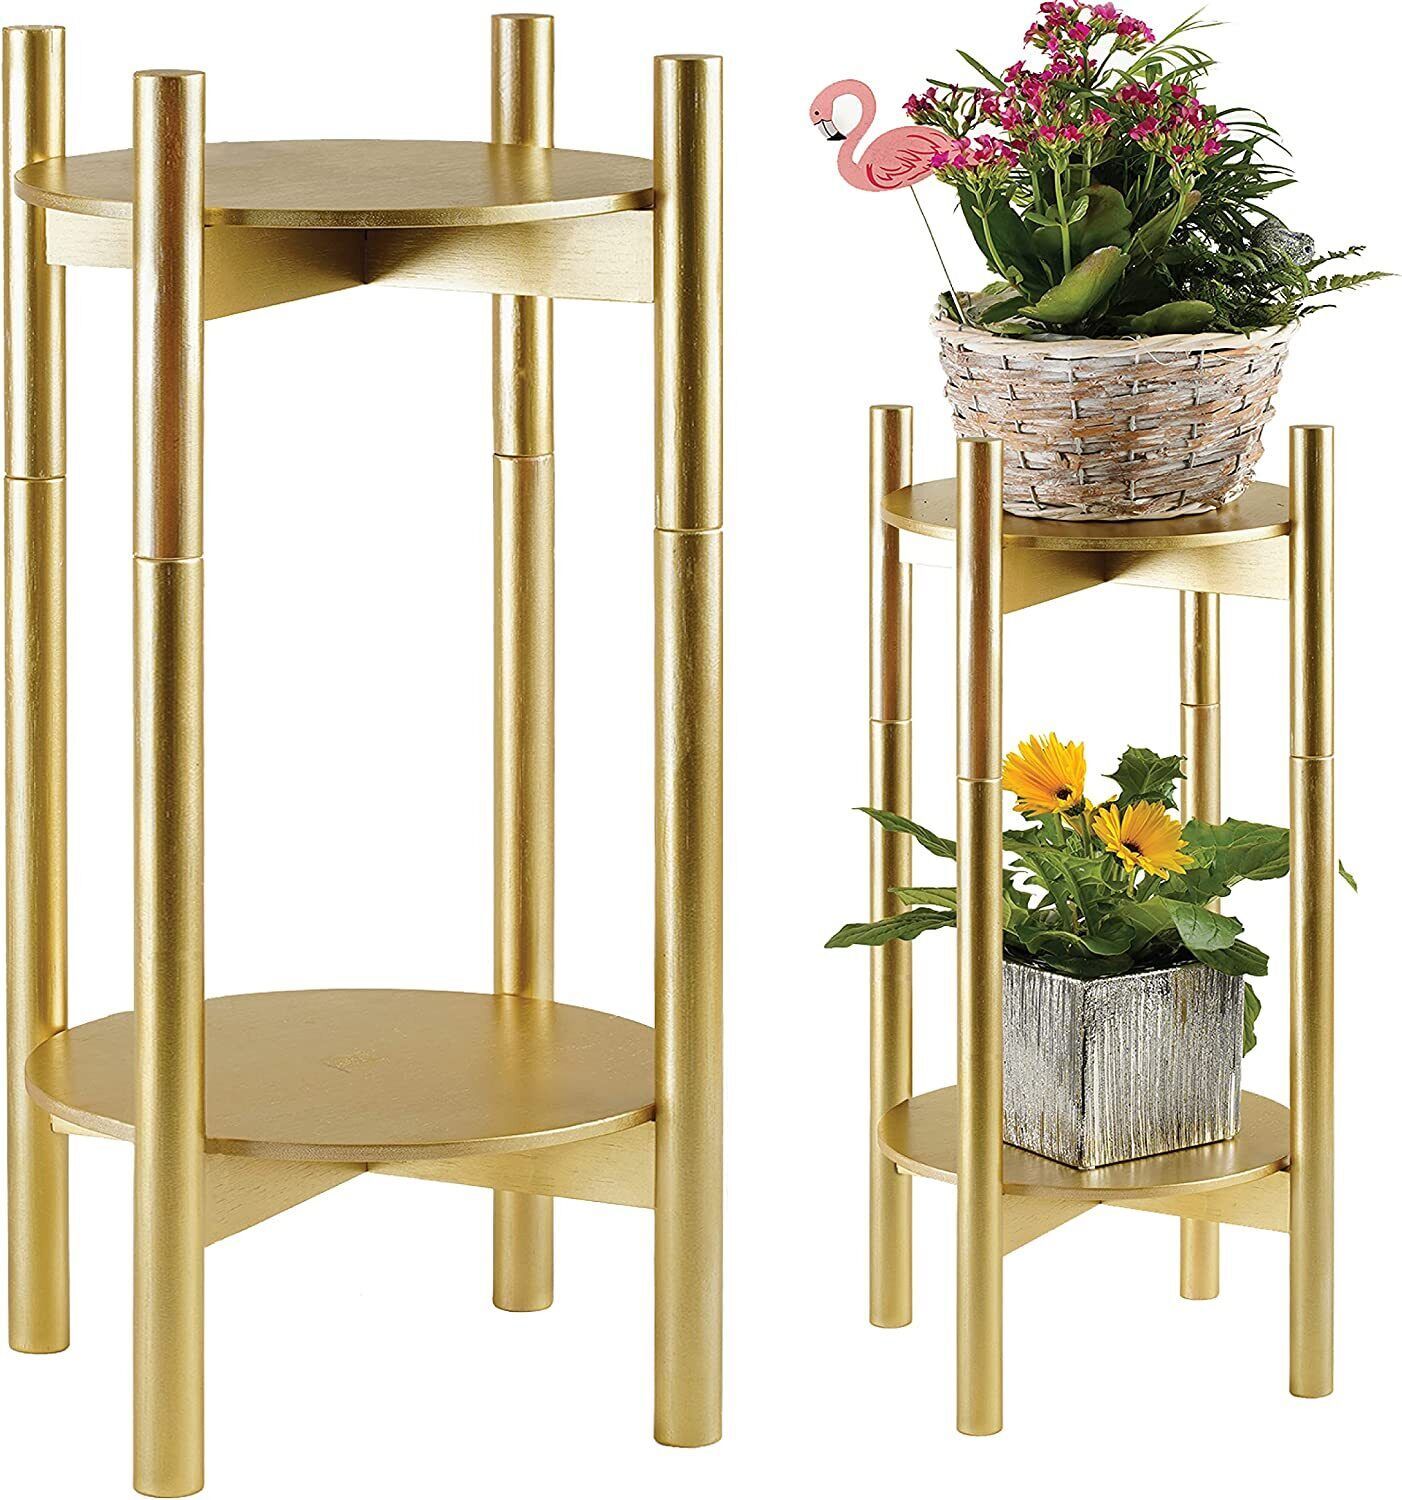 Golden Indoor Plant Stand For 5 To 10 Inch Diameter Planter Pots 24 Inches  High | Ebay Regarding 5 Inch Plant Stands (View 8 of 15)